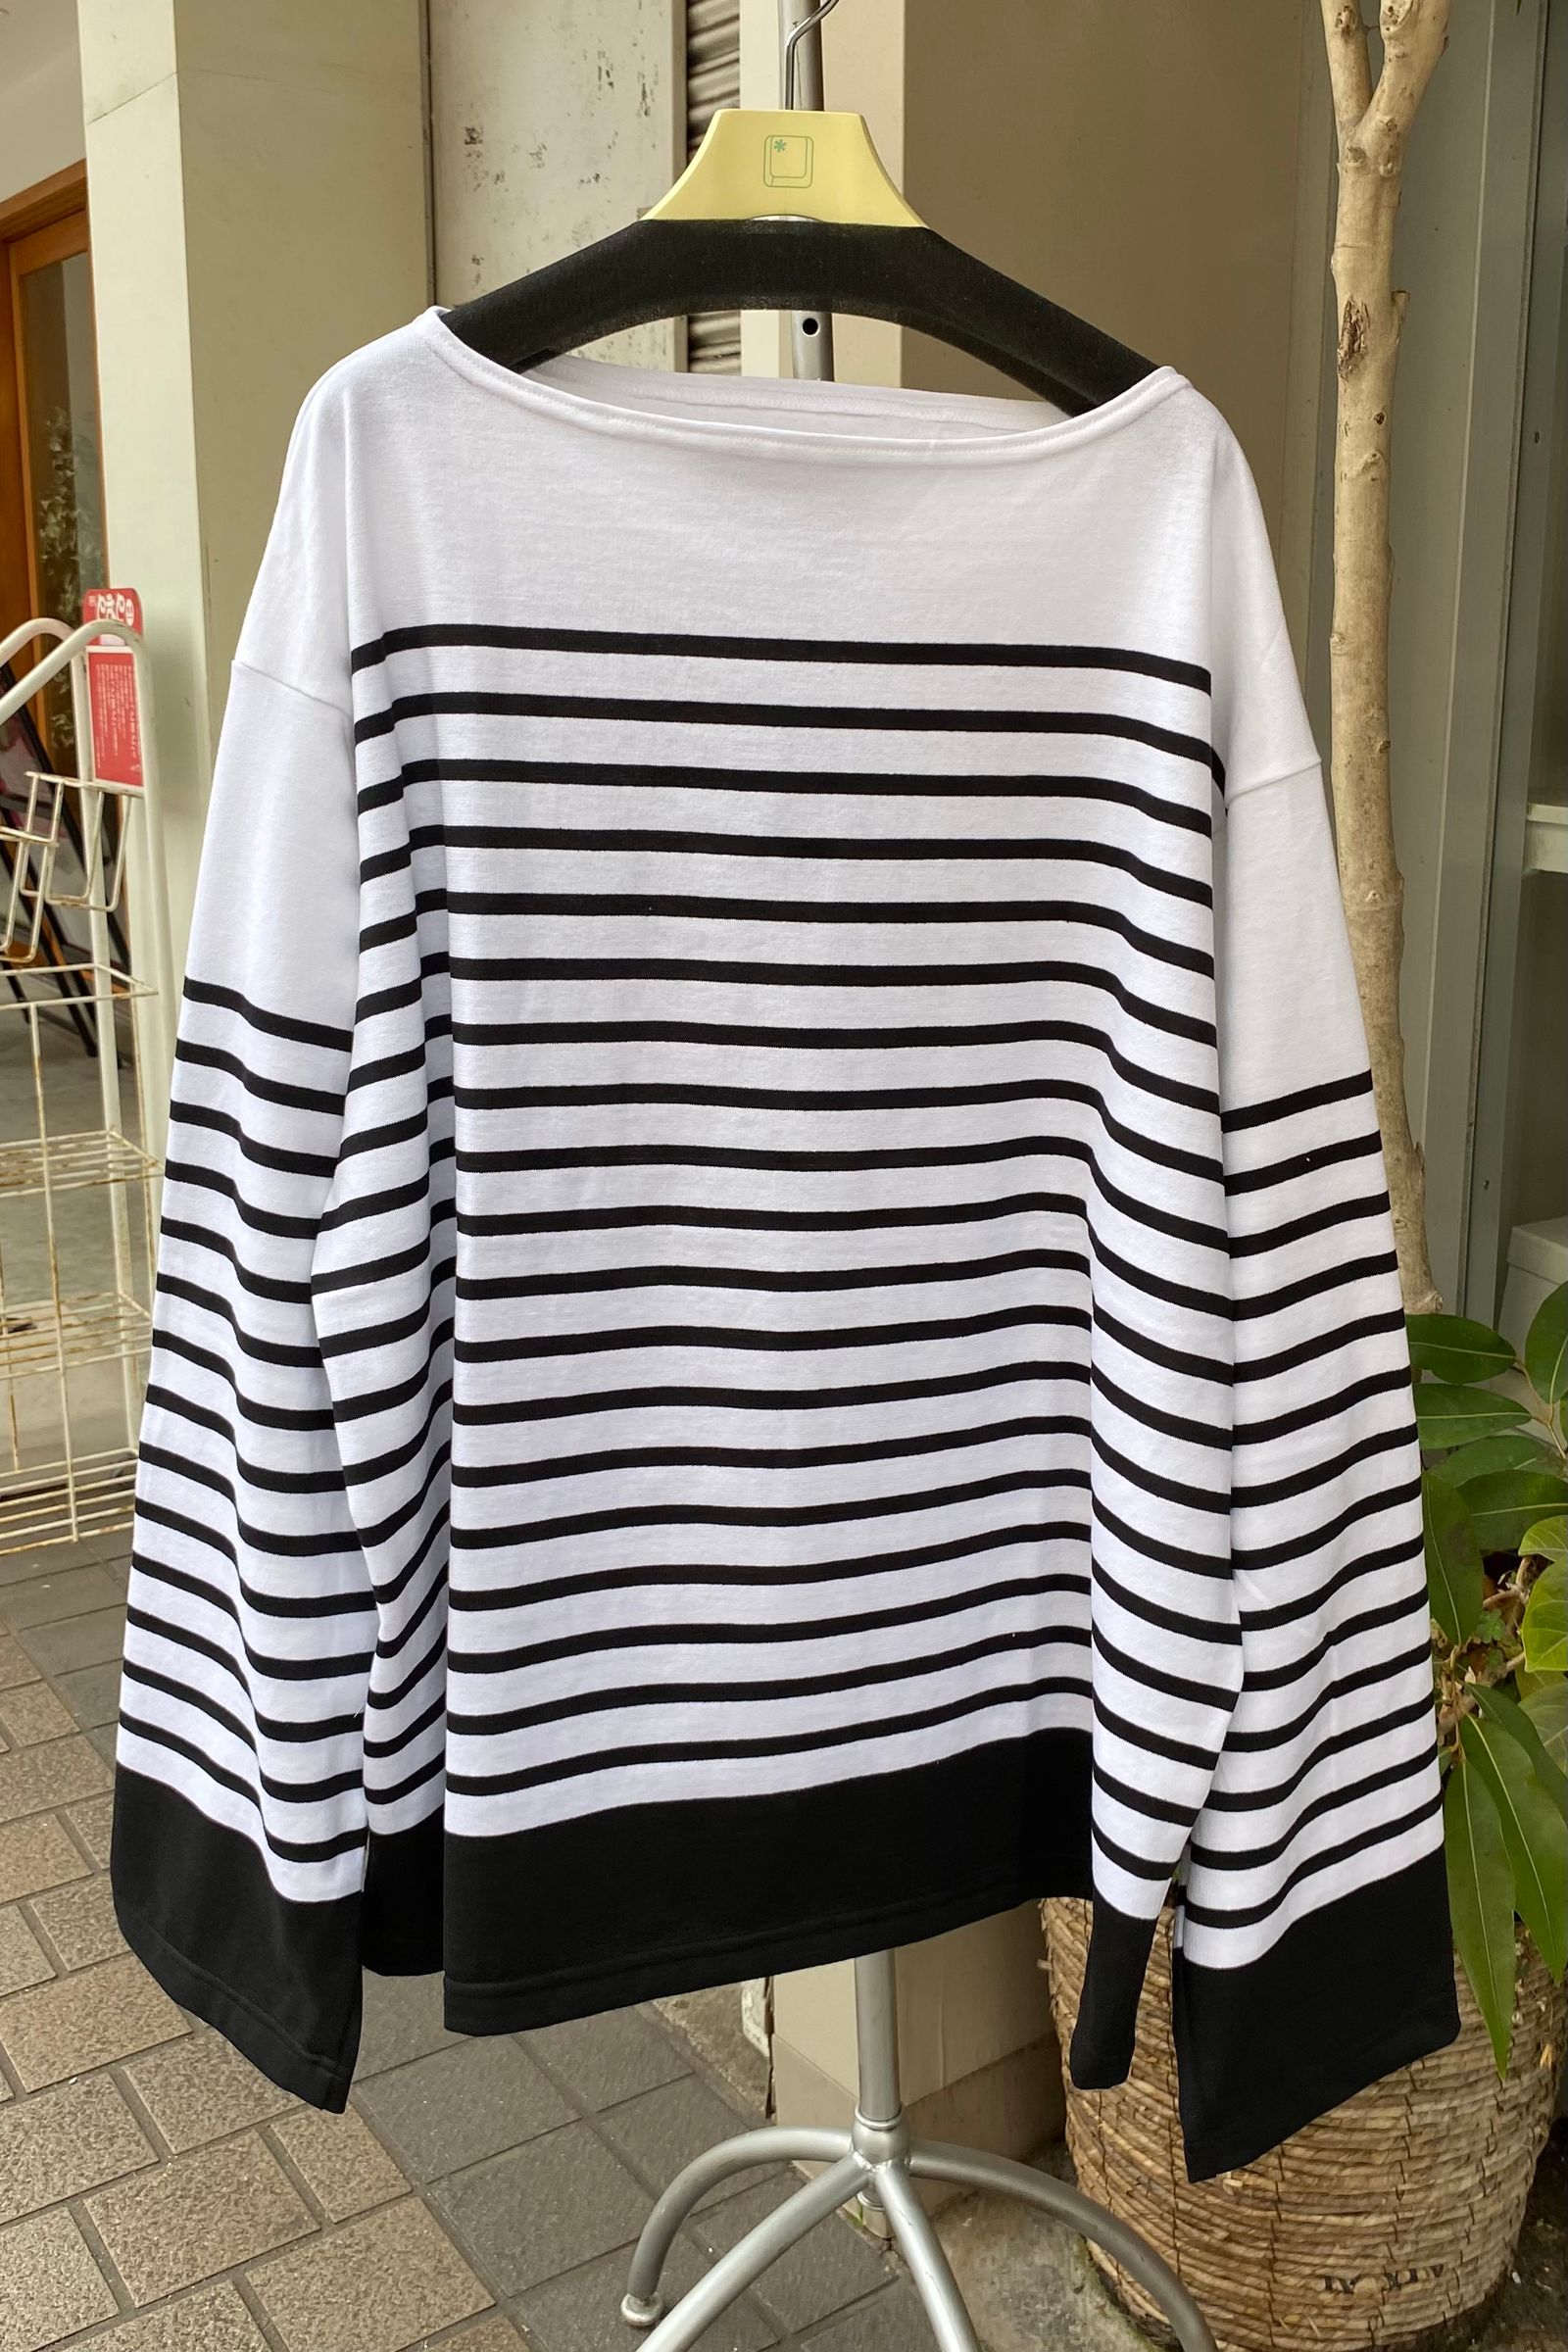 OUTIL - バスクシャツ/tricot aast -white/black- 23ss unisex | asterisk